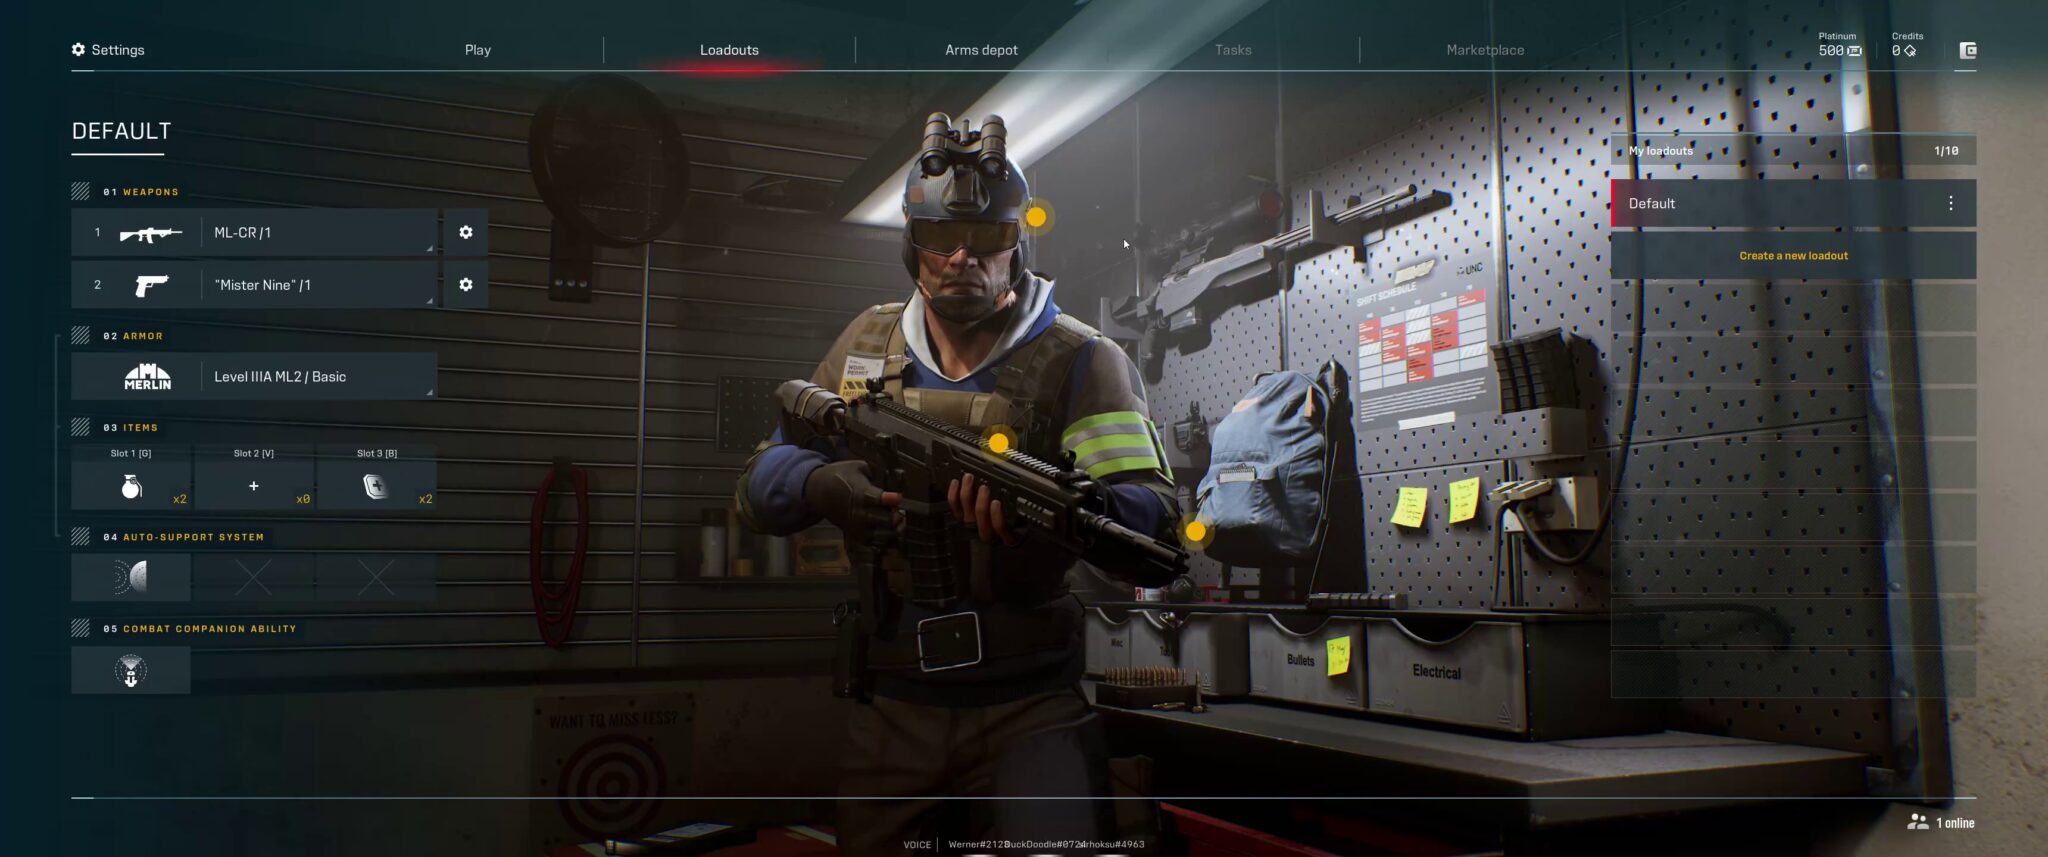 The loadout screen is where we build classes.